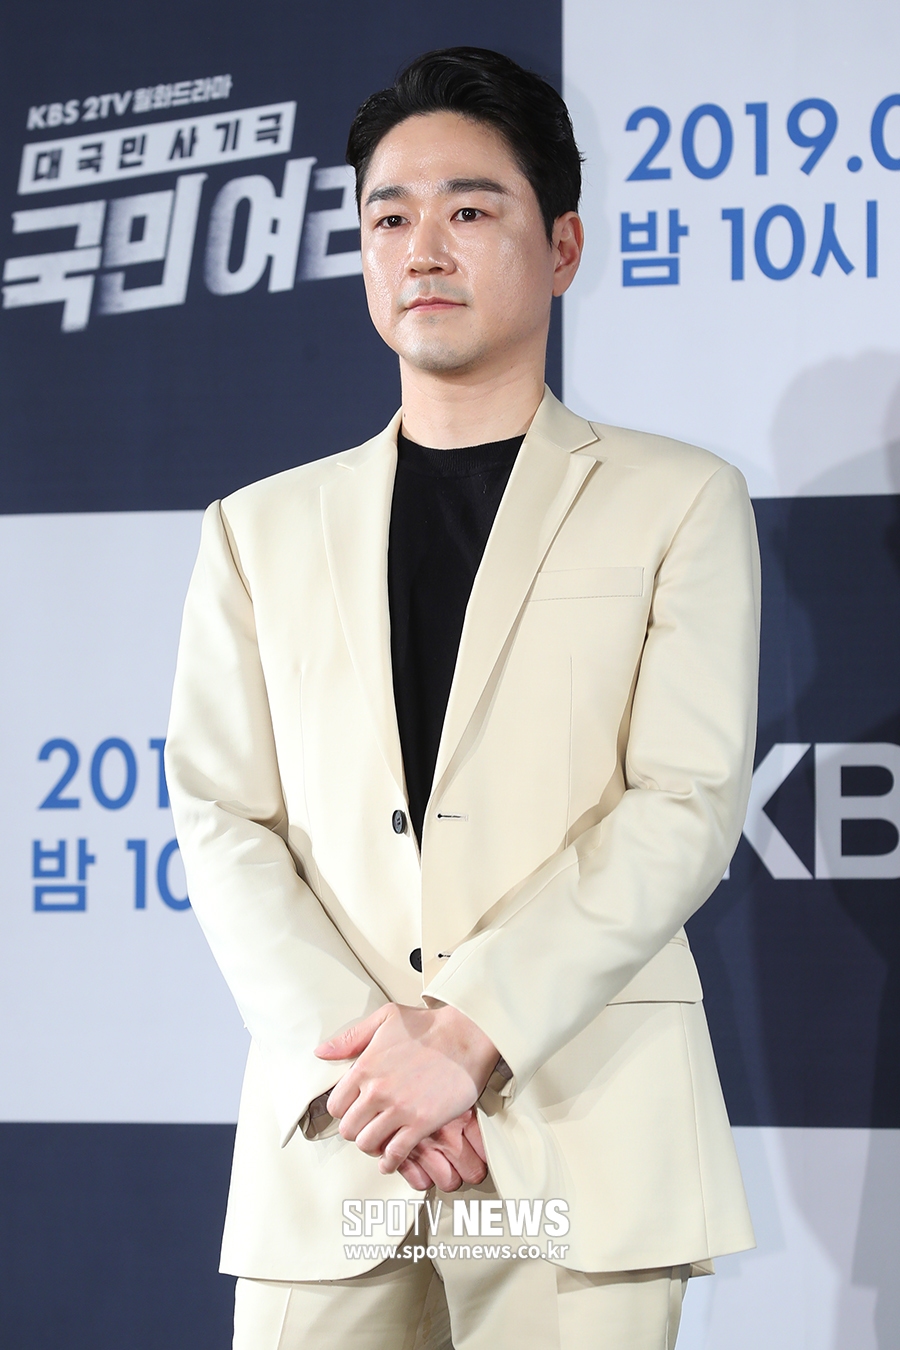 KBS 2TV New Moonwha drama People! The production presentation was held at the Conrad Hotel in Yeouido, Yeongdeungpo-gu, Seoul on the afternoon of the 1st. Actor Tae In-ho poses.